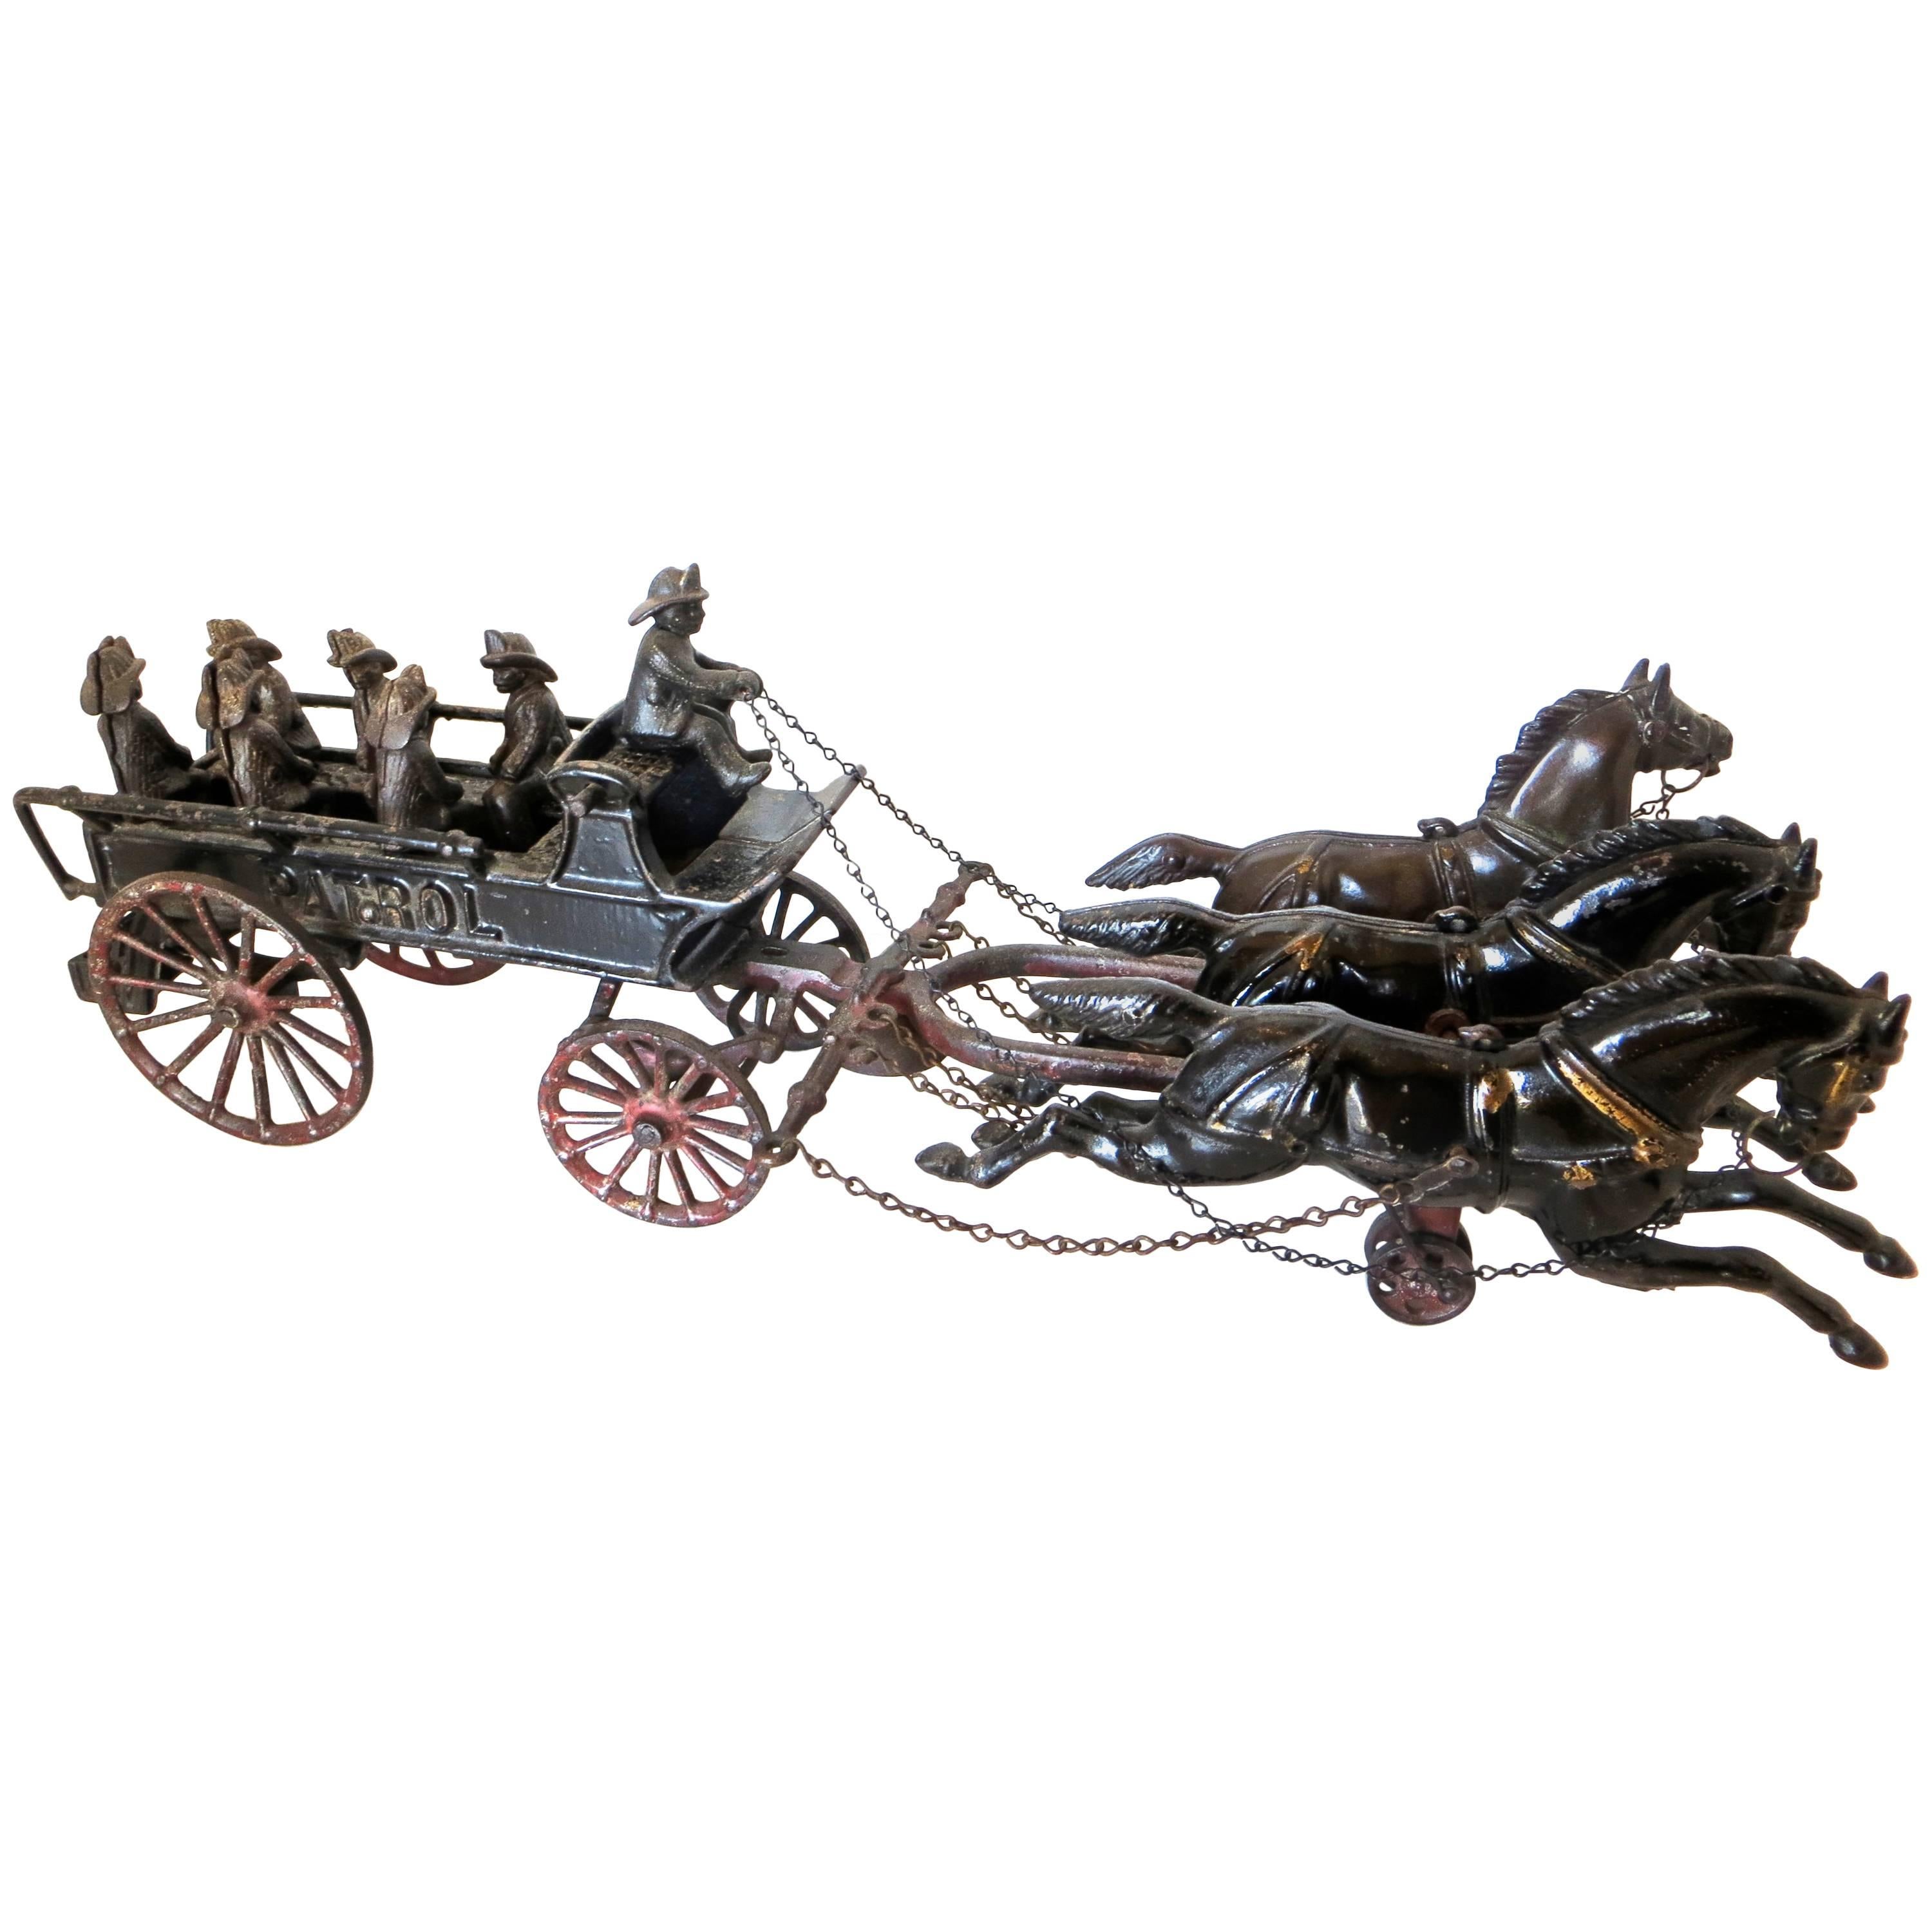 Replacement mid-size fireman for 1920s Kenton horse drawn fire wagon 